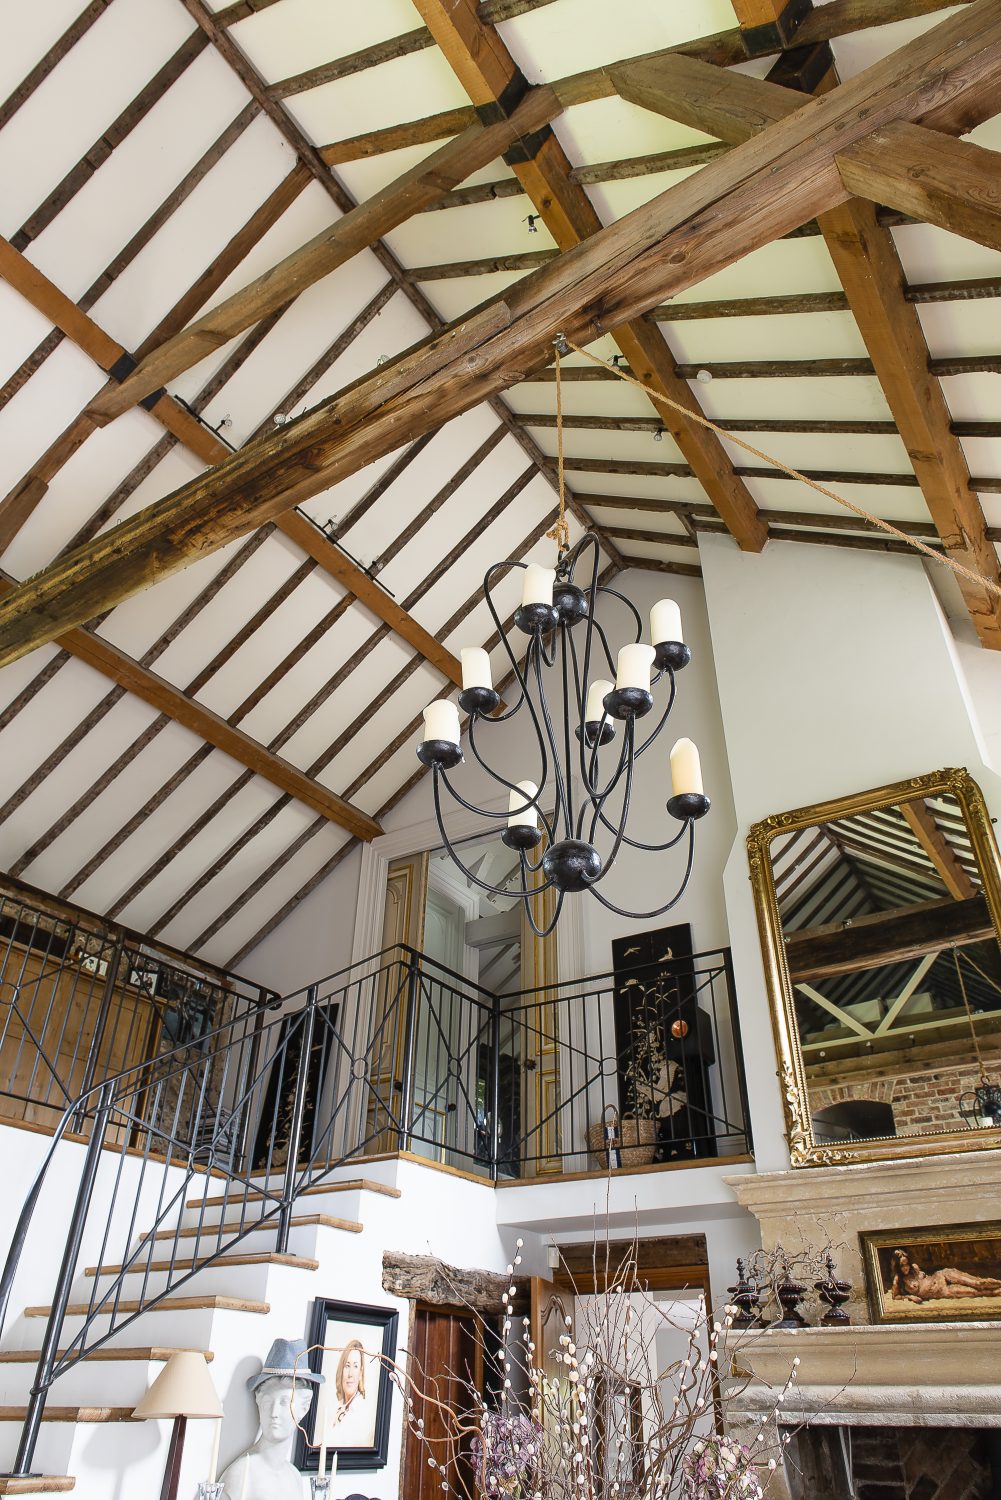 The dining room’s candle chandelier is operated with a rope pulley, that you let down to light the candles, then hoist up again adding to the room’s almost medieval charm